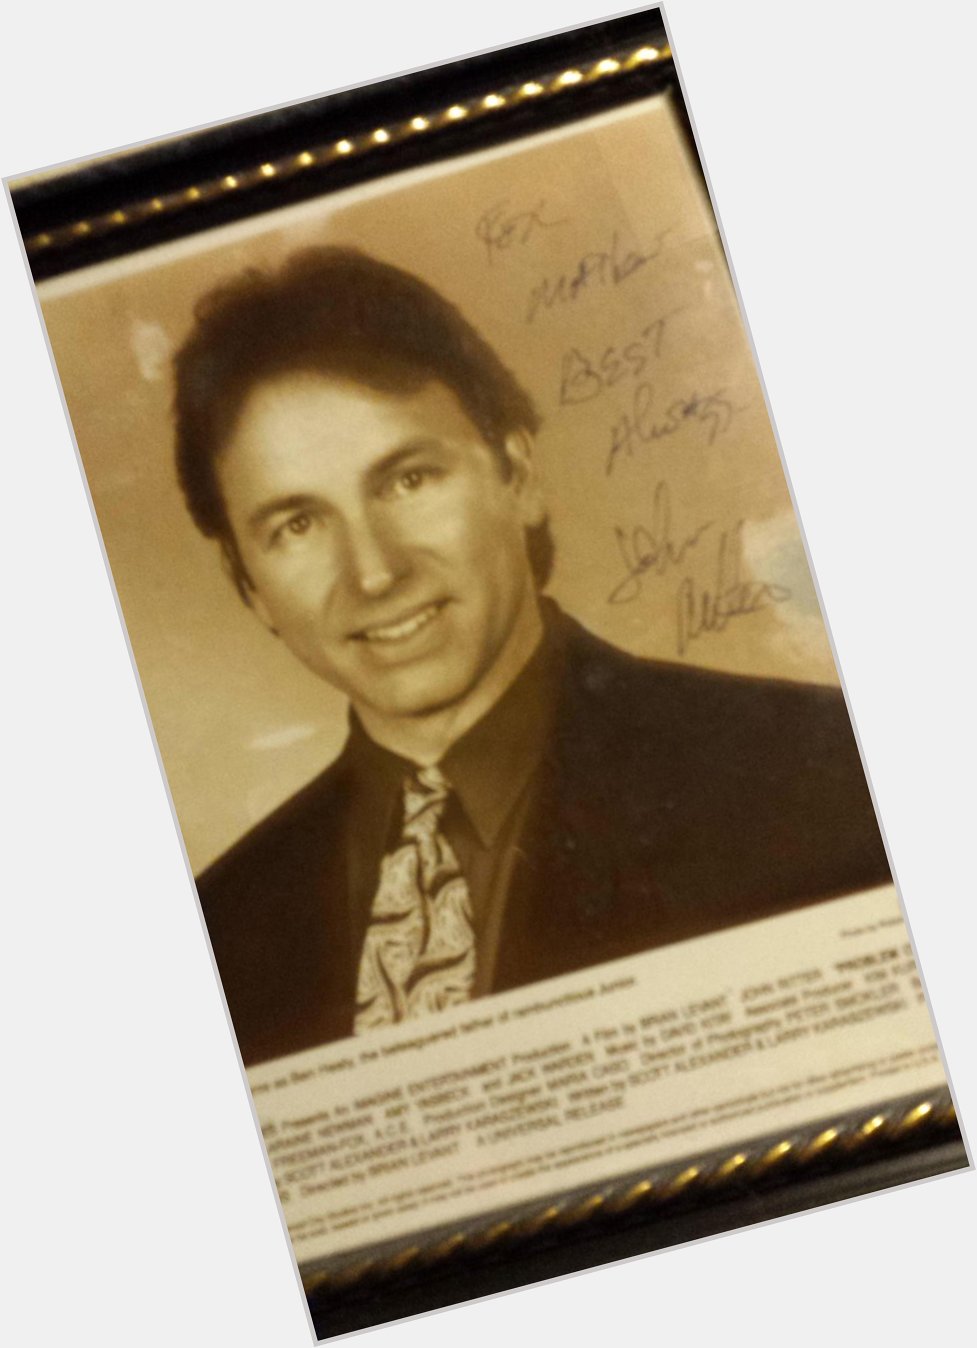 Happy birthday to John Ritter. One of my favorites would be 67 today 